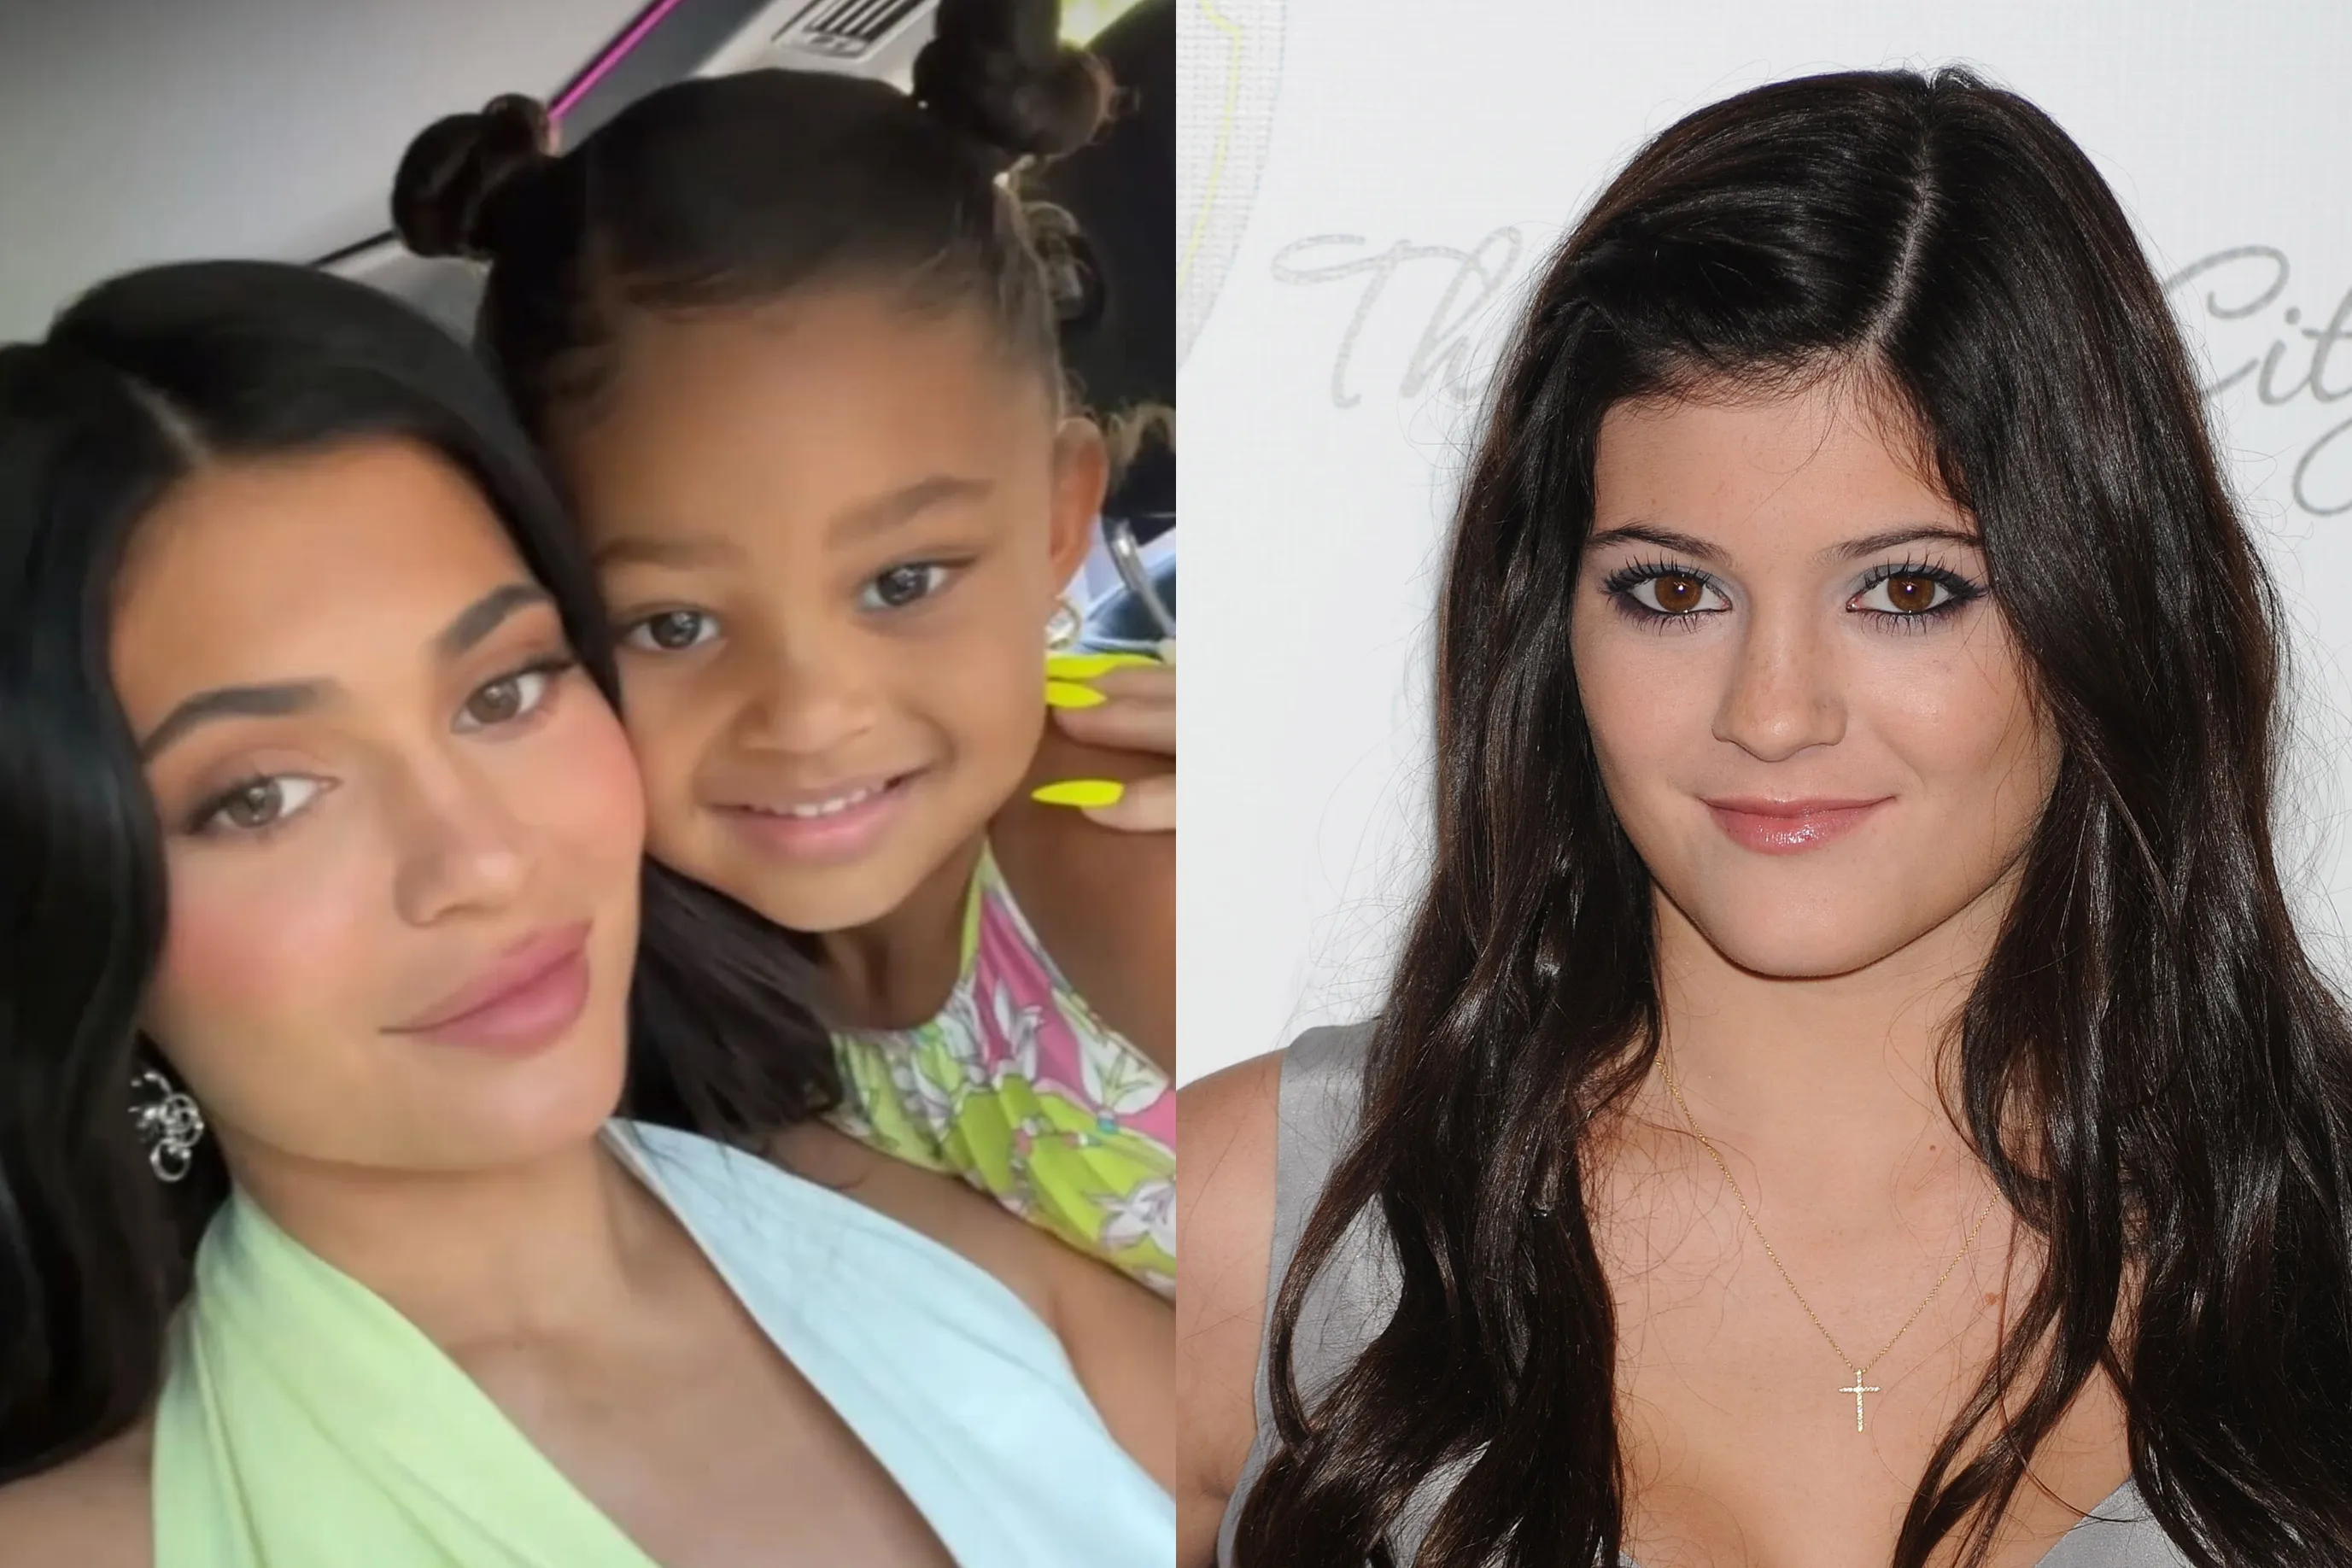 From Cute Kid To Business Woman: The Transformation Of A Reality TV Star